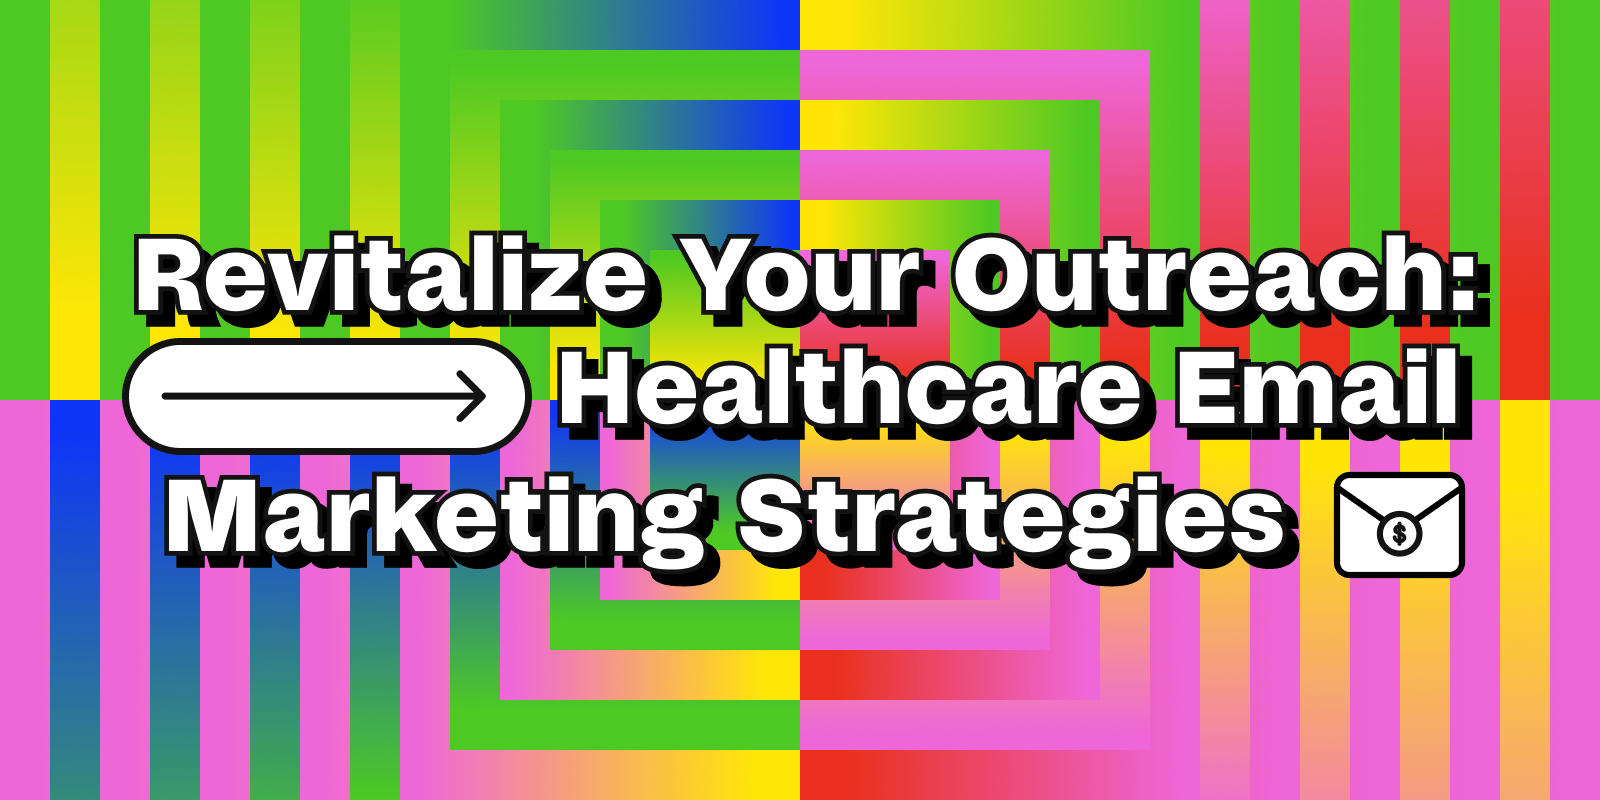 Healthcare email marketing strategies